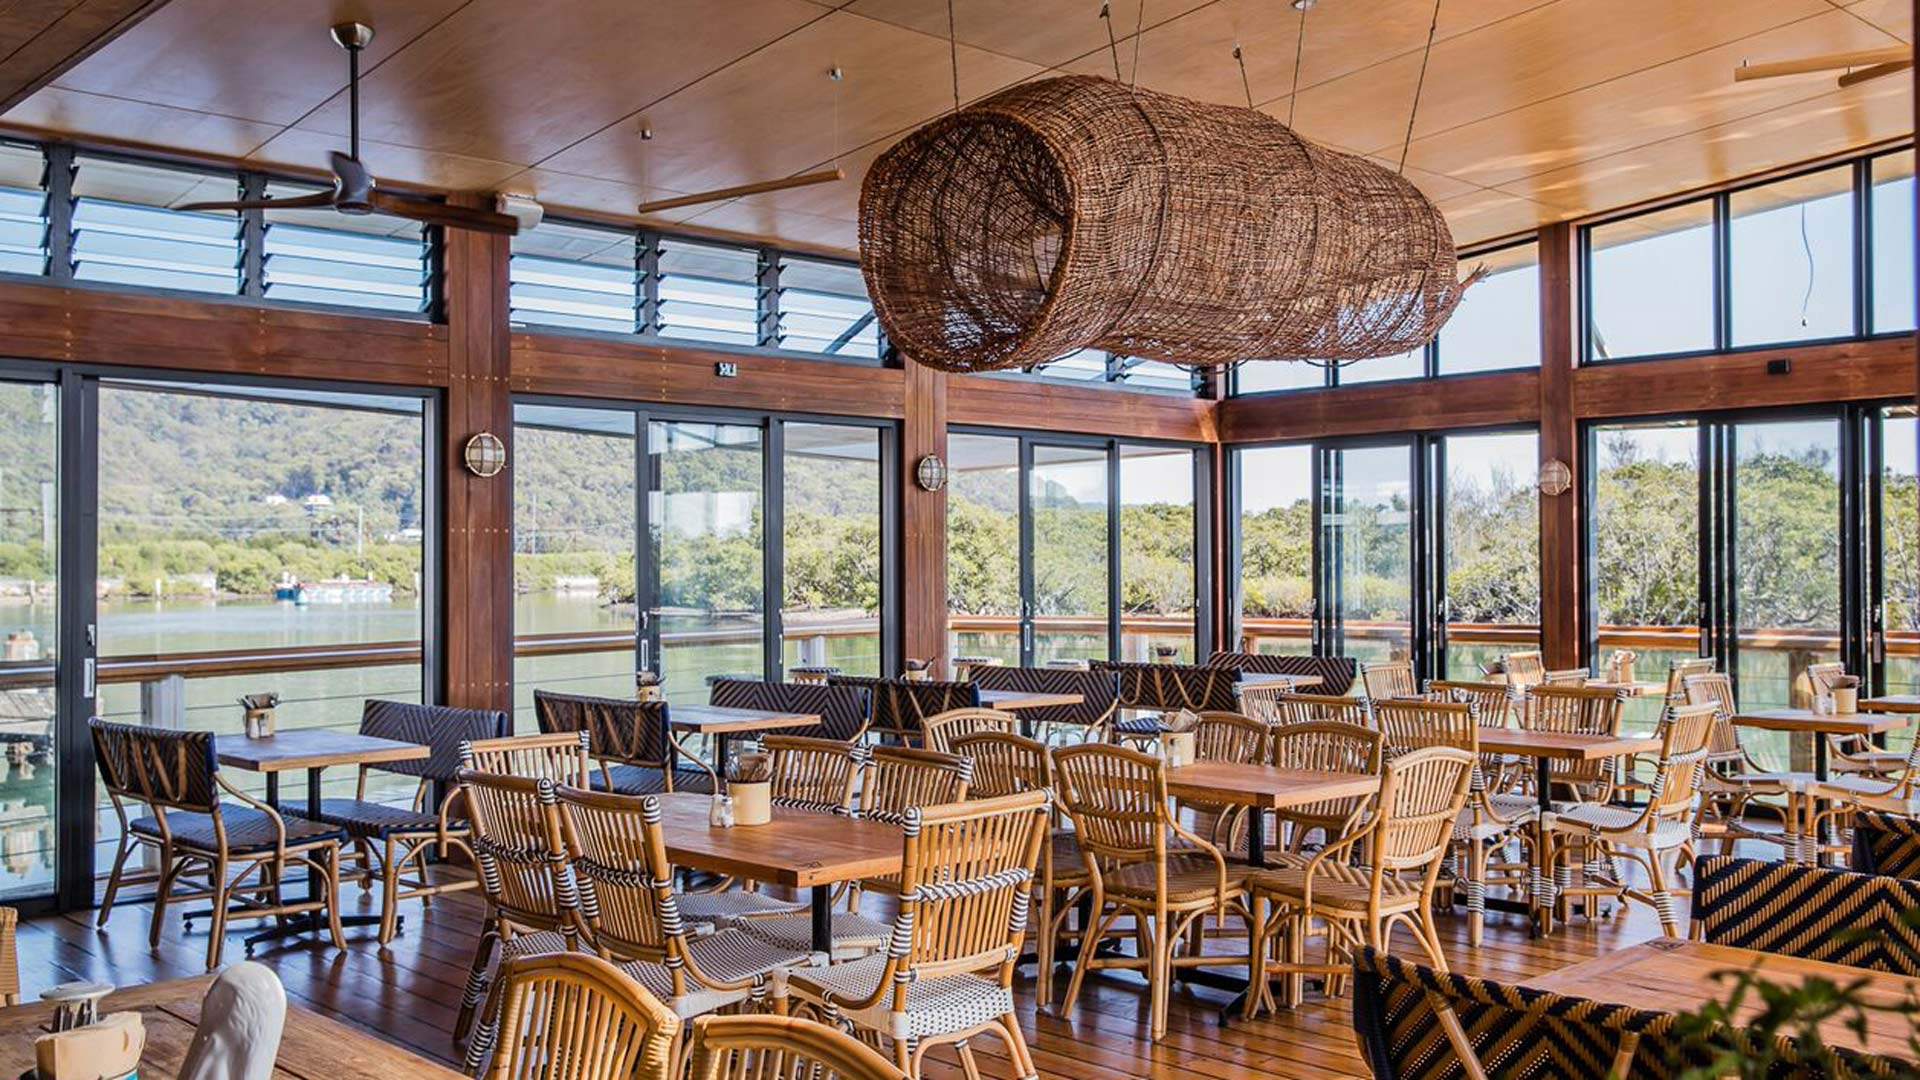 Woy Woy Fishermen's Wharf's Revamped Restaurant Is Your New Excuse to Head Out of the City